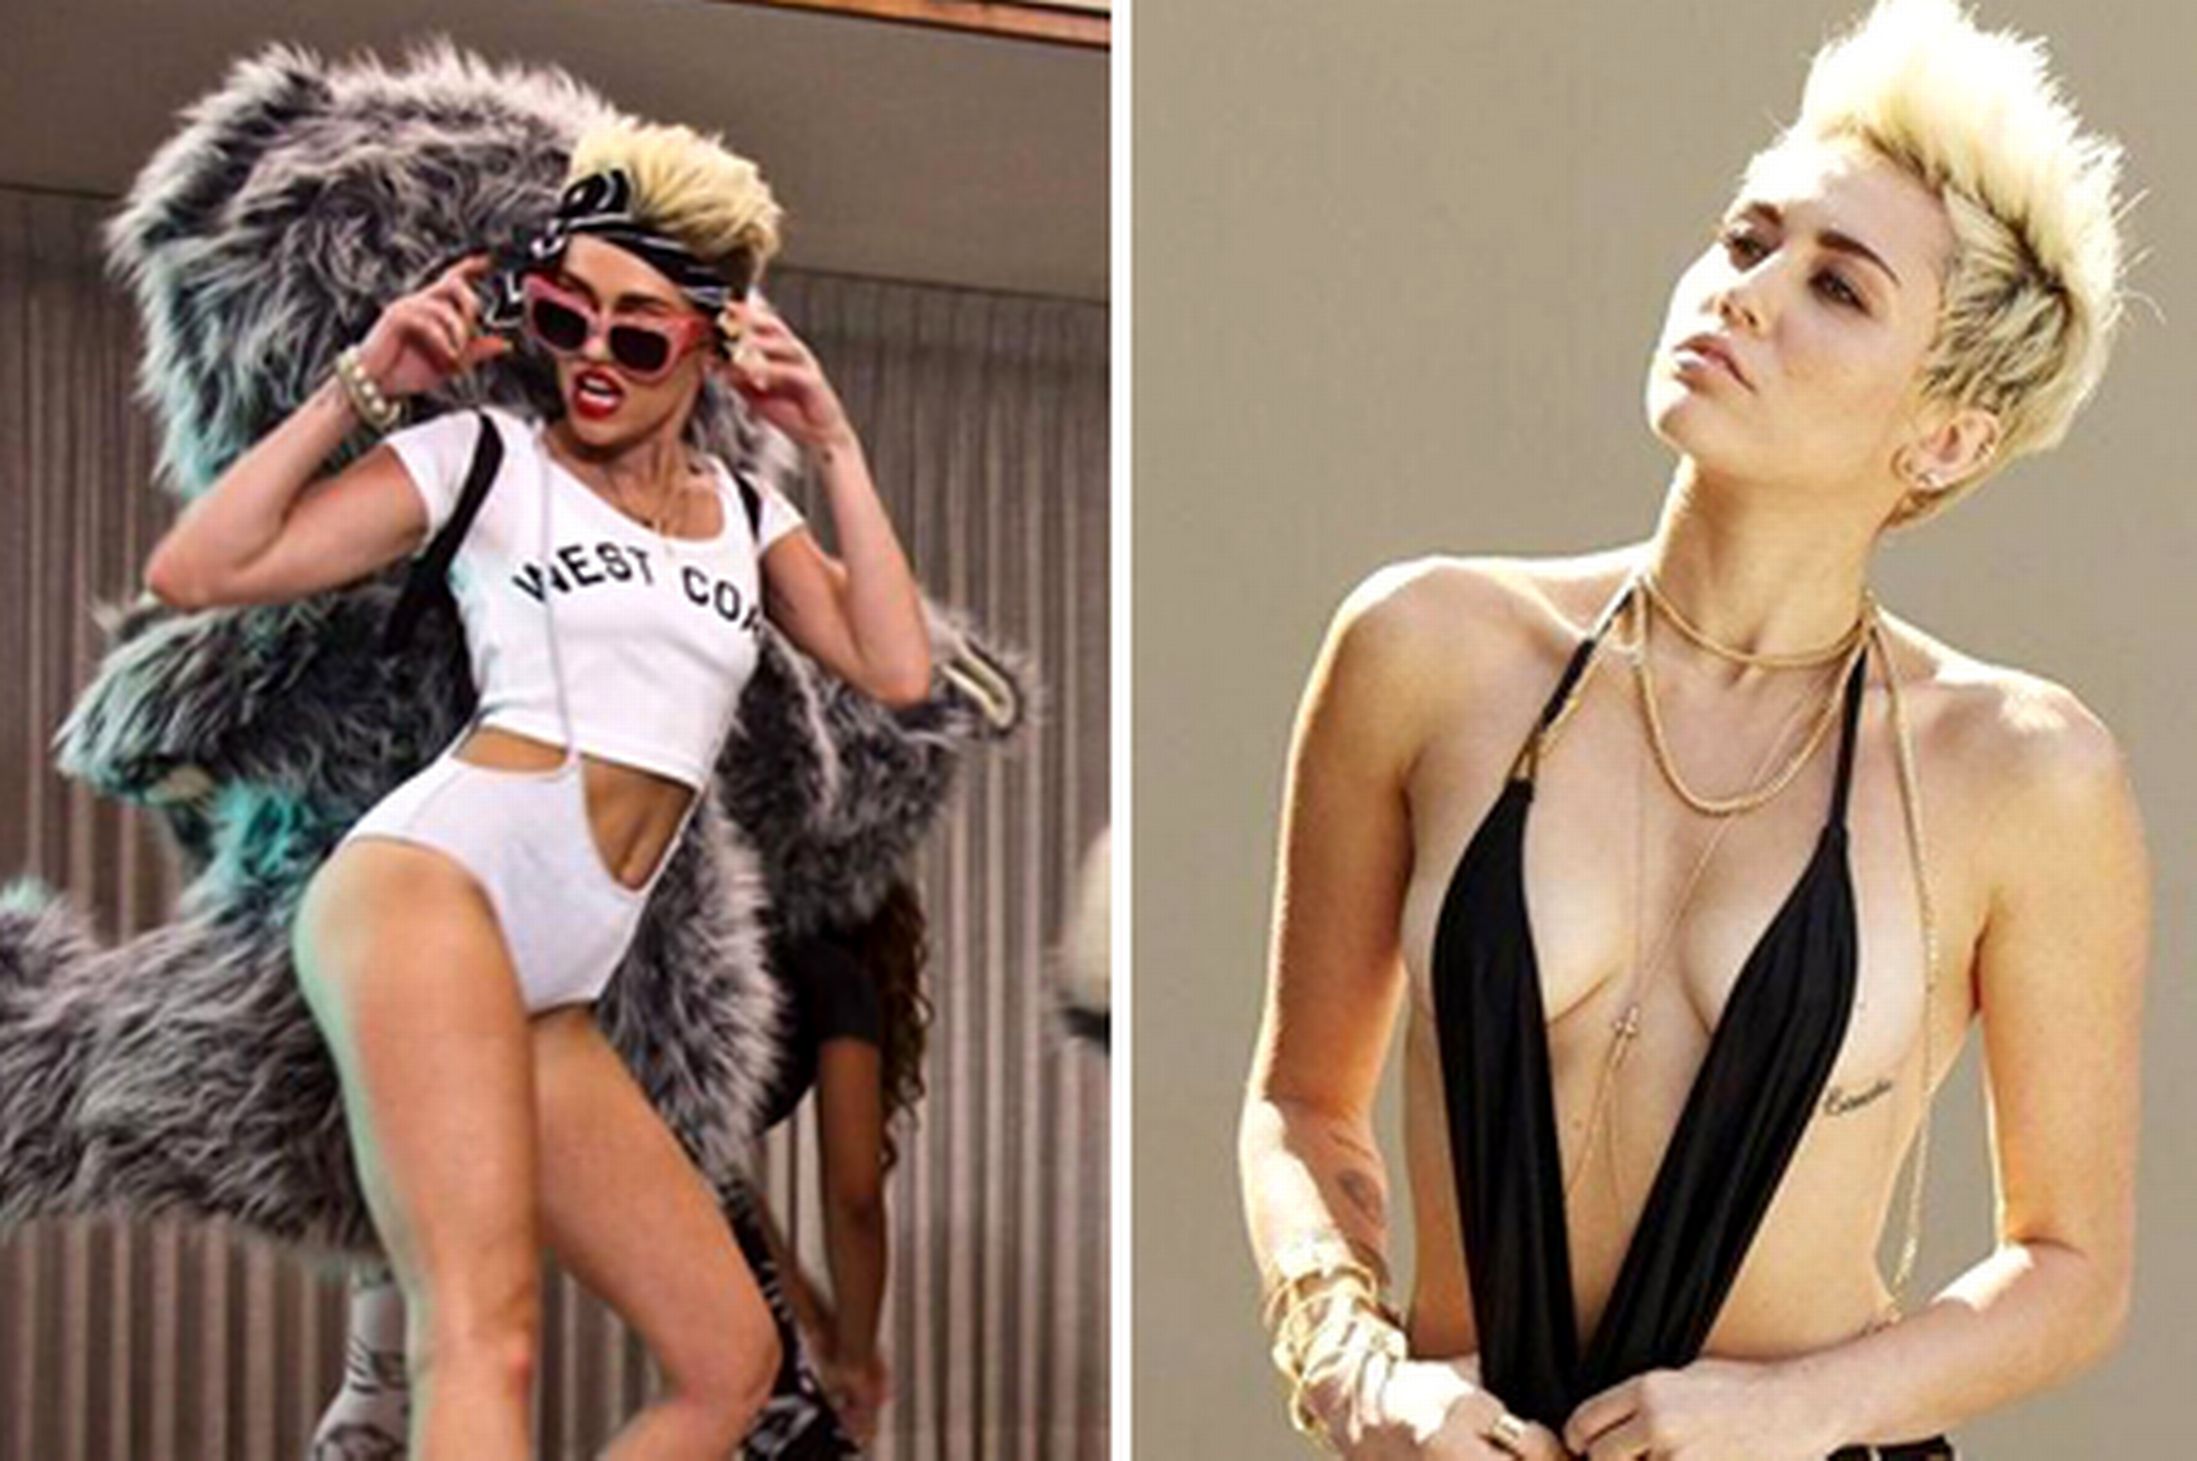 Miley Cyrus, caterpillar to butterfly? Or staged Disney transition, from child star to sexpot! « In the Know